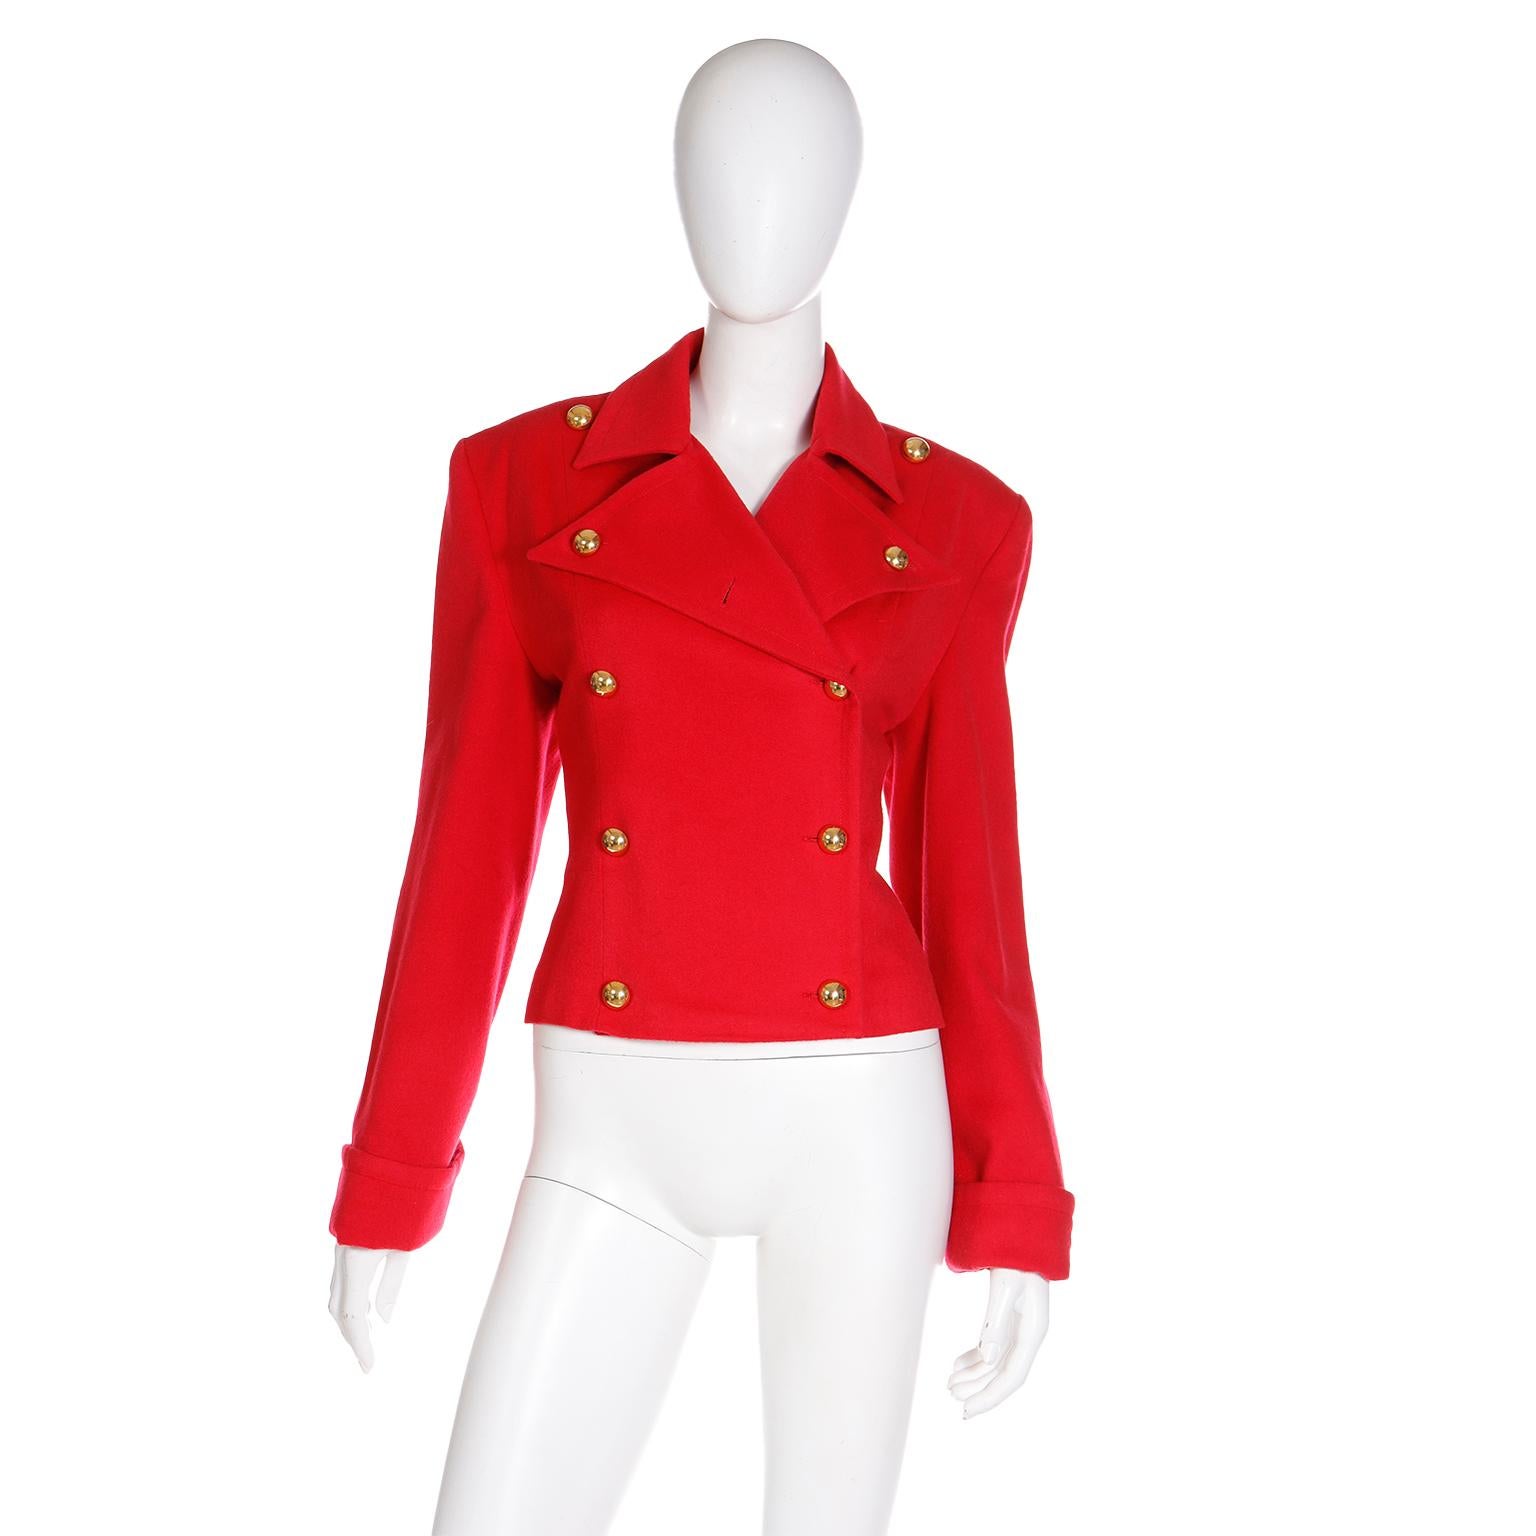 This vintage 1980's Patrick Kelly jacket is in the perfect shade of red! The soft cashmere wool blend fabric and contrasting double row of gold buttons makes this jacket stand out as a luxurious piece that would elevate any wardrobe! Patrick Kelly